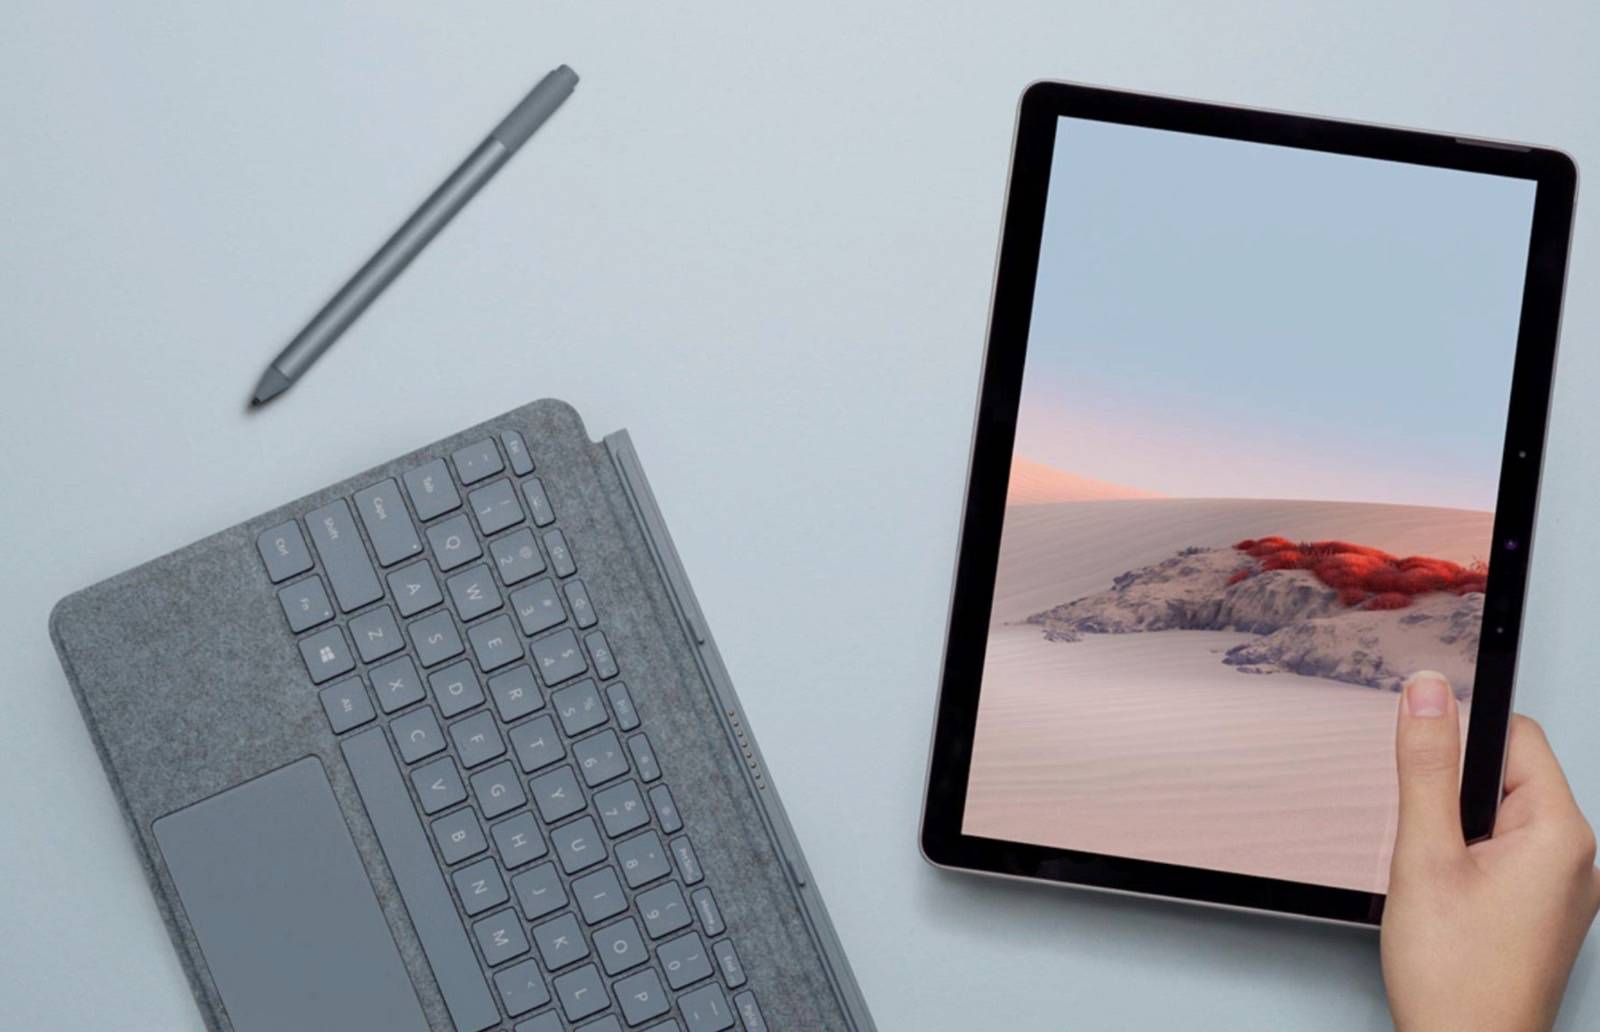 Microsoft’s Surface Accelerate 3 tablet will acquire supreme leaked